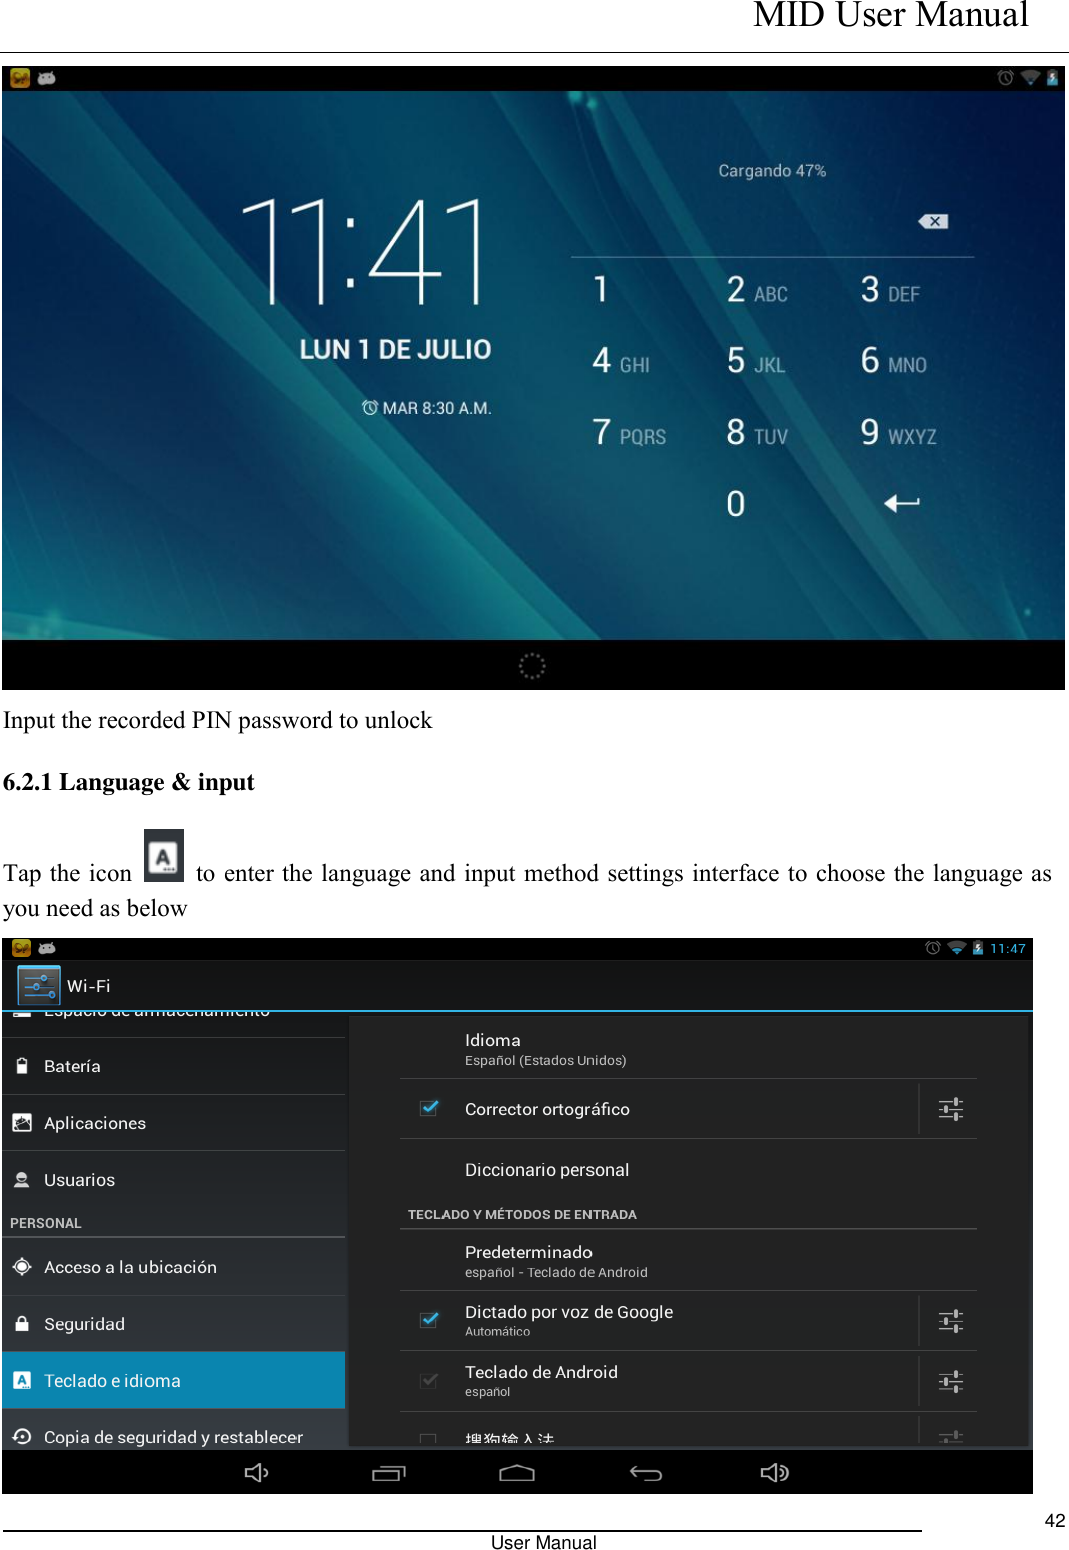    MID User Manual                                                                                                            User Manual     42  Input the recorded PIN password to unlock 6.2.1 Language &amp; input Tap the icon    to enter the language and input method settings interface to choose the language as you need as below  